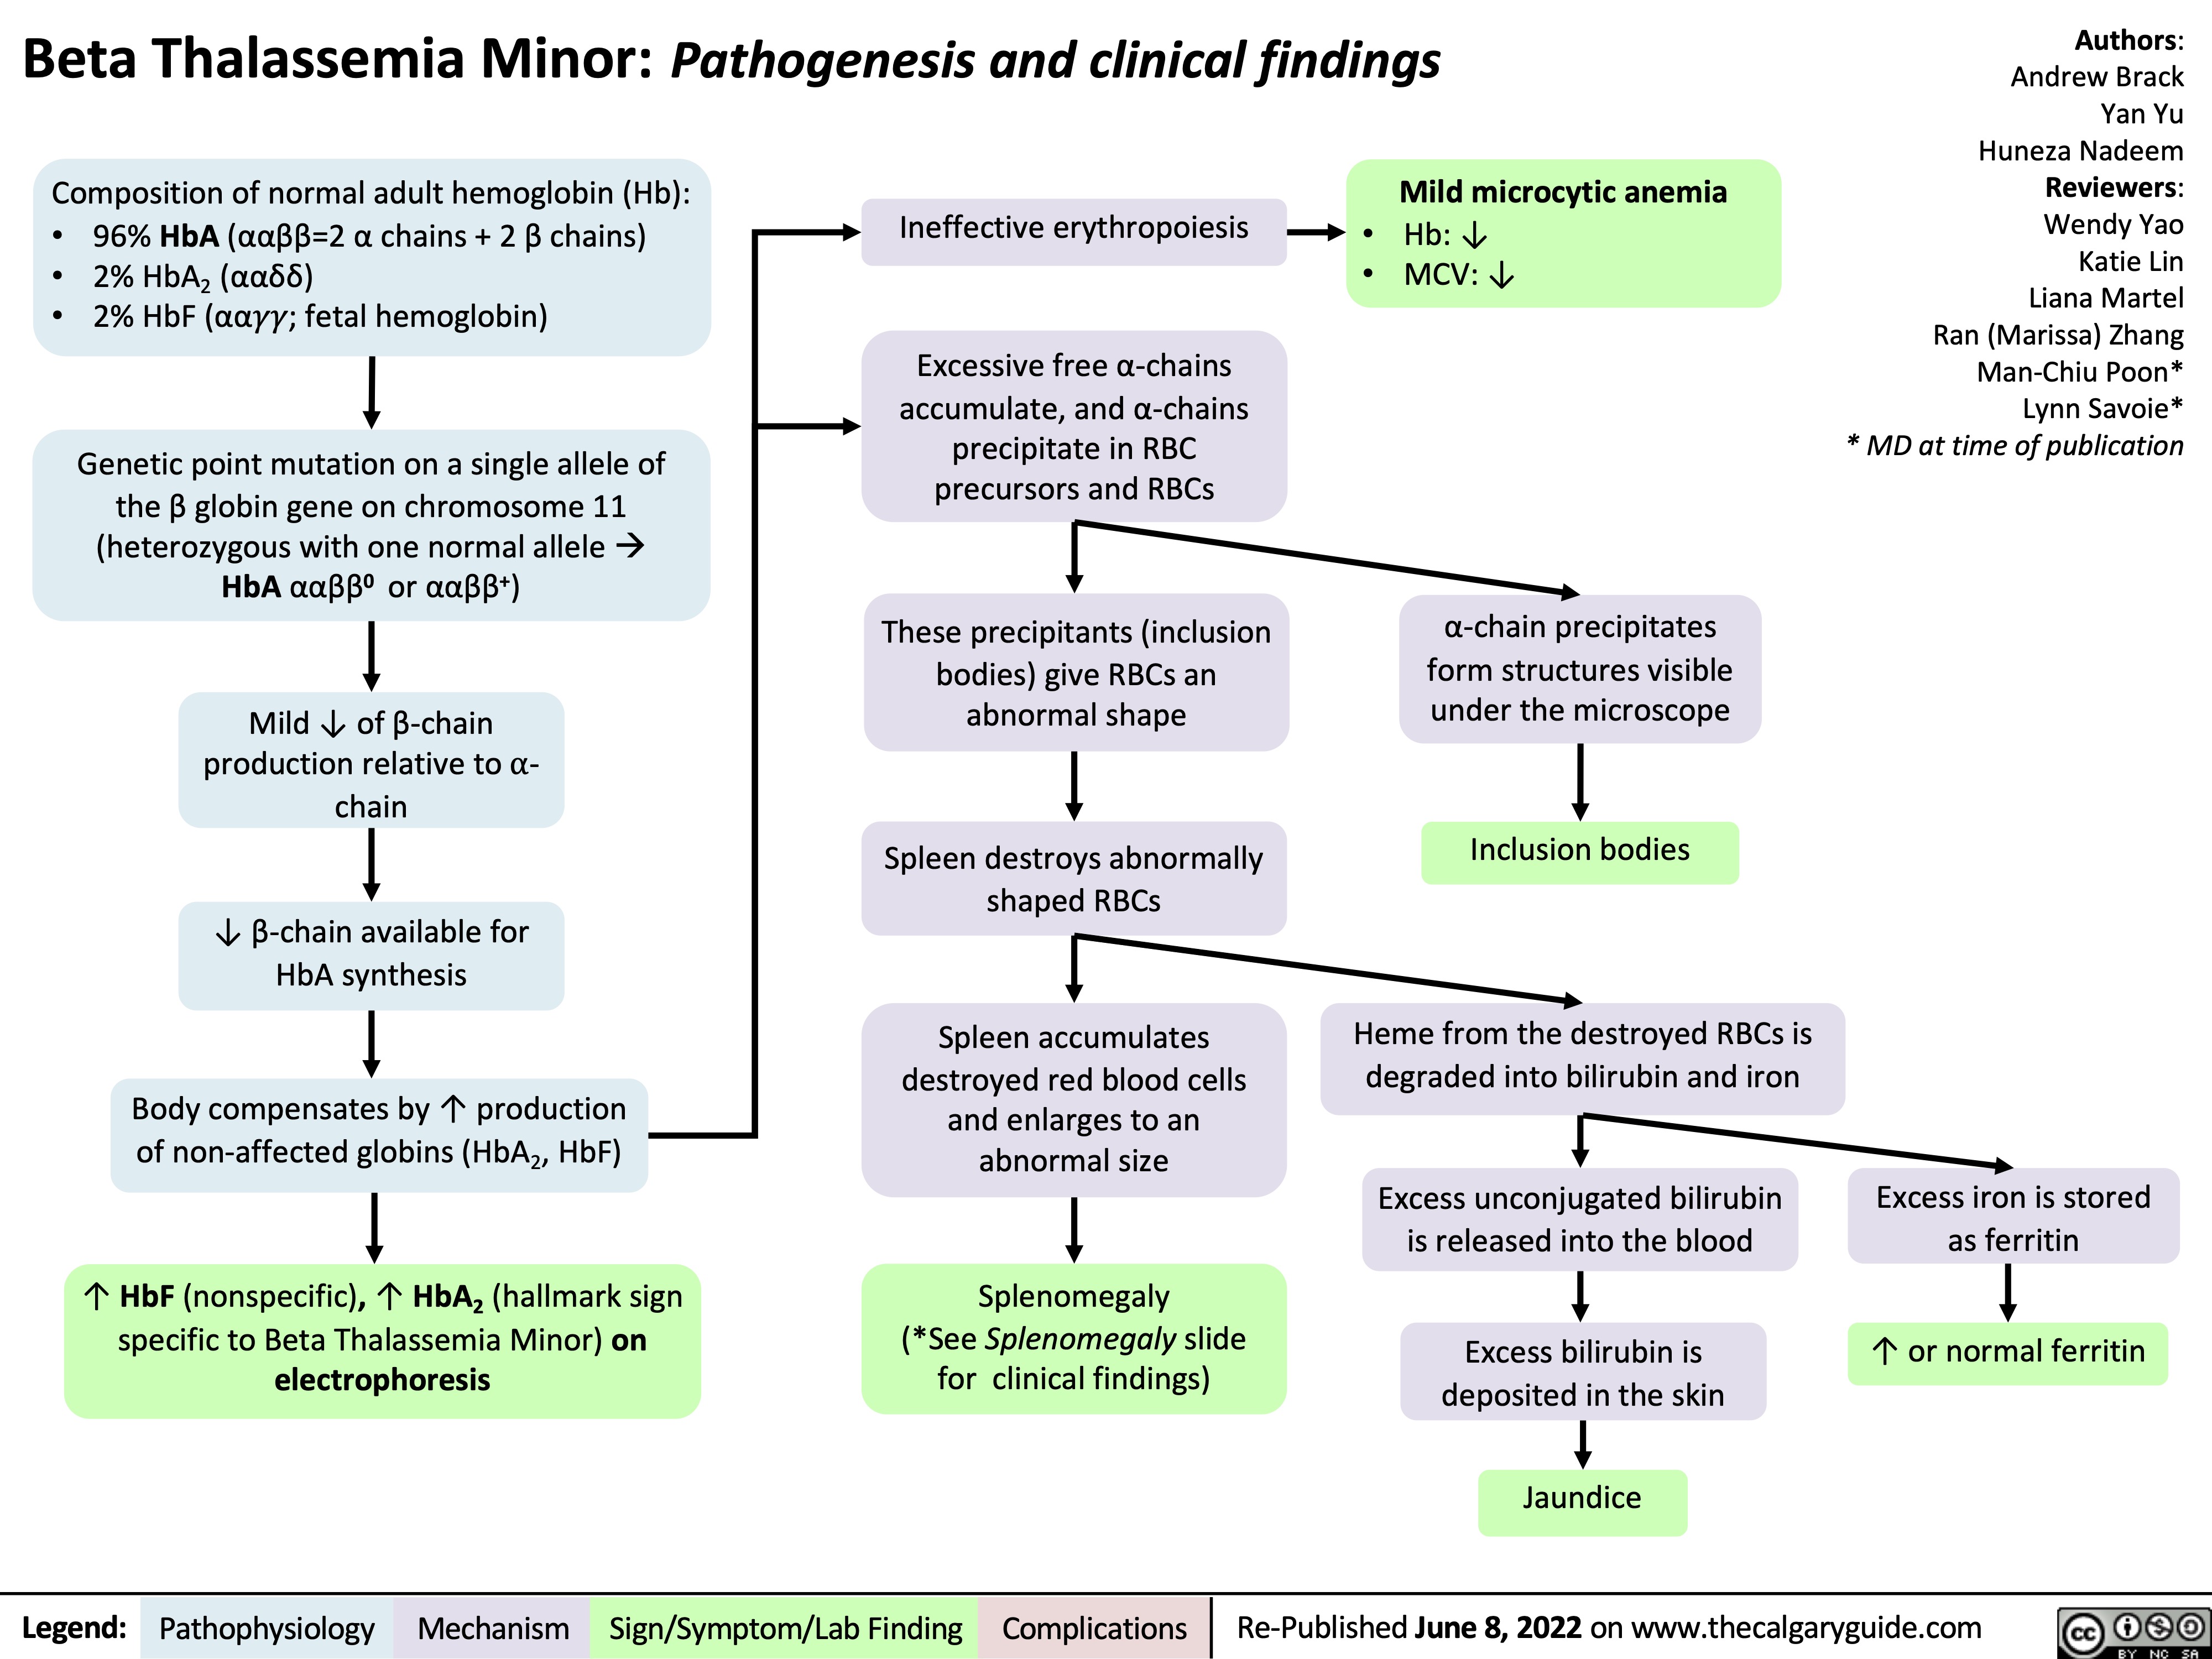 Beta Thalassemia Minor: Pathogenesis and clinical findings
Authors: Andrew Brack Yan Yu Huneza Nadeem Reviewers: Wendy Yao Katie Lin Liana Martel Ran (Marissa) Zhang Man-Chiu Poon* Lynn Savoie* * MD at time of publication
  Composition of normal adult hemoglobin (Hb):
Ineffective erythropoiesis
Excessive free α-chains accumulate, and α-chains precipitate in RBC precursors and RBCs
These precipitants (inclusion bodies) give RBCs an abnormal shape
Spleen destroys abnormally shaped RBCs
Spleen accumulates destroyed red blood cells and enlarges to an abnormal size
Splenomegaly (*See Splenomegaly slide for clinical findings)
Mild microcytic anemia
Hb: ↓ MCV: ↓
 • • •
96% HbA (ααββ=2 α chains + 2 β chains) 2% HbA2 (ααẟẟ)
2% HbF (αα!!; fetal hemoglobin)
Genetic point mutation on a single allele of the β globin gene on chromosome 11 (heterozygous with one normal alleleà HbA ααββ0 or ααββ+)
Mild ↓ of β-chain production relative to ⍺- chain
↓ β-chain available for HbA synthesis
Body compensates by ↑ production
of non-affected globins (HbA , HbF) 2
↑ HbF (nonspecific), ↑ HbA2 (hallmark sign specific to Beta Thalassemia Minor) on electrophoresis
• •
      α-chain precipitates form structures visible under the microscope
Inclusion bodies
       Heme from the destroyed RBCs is degraded into bilirubin and iron
Excess unconjugated bilirubin is released into the blood
Excess bilirubin is deposited in the skin
Jaundice
Excess iron is stored as ferritin
↑ or normal ferritin
          Legend:
 Pathophysiology
 Mechanism
 Sign/Symptom/Lab Finding
 Complications
Re-Published June 8, 2022 on www.thecalgaryguide.com
  